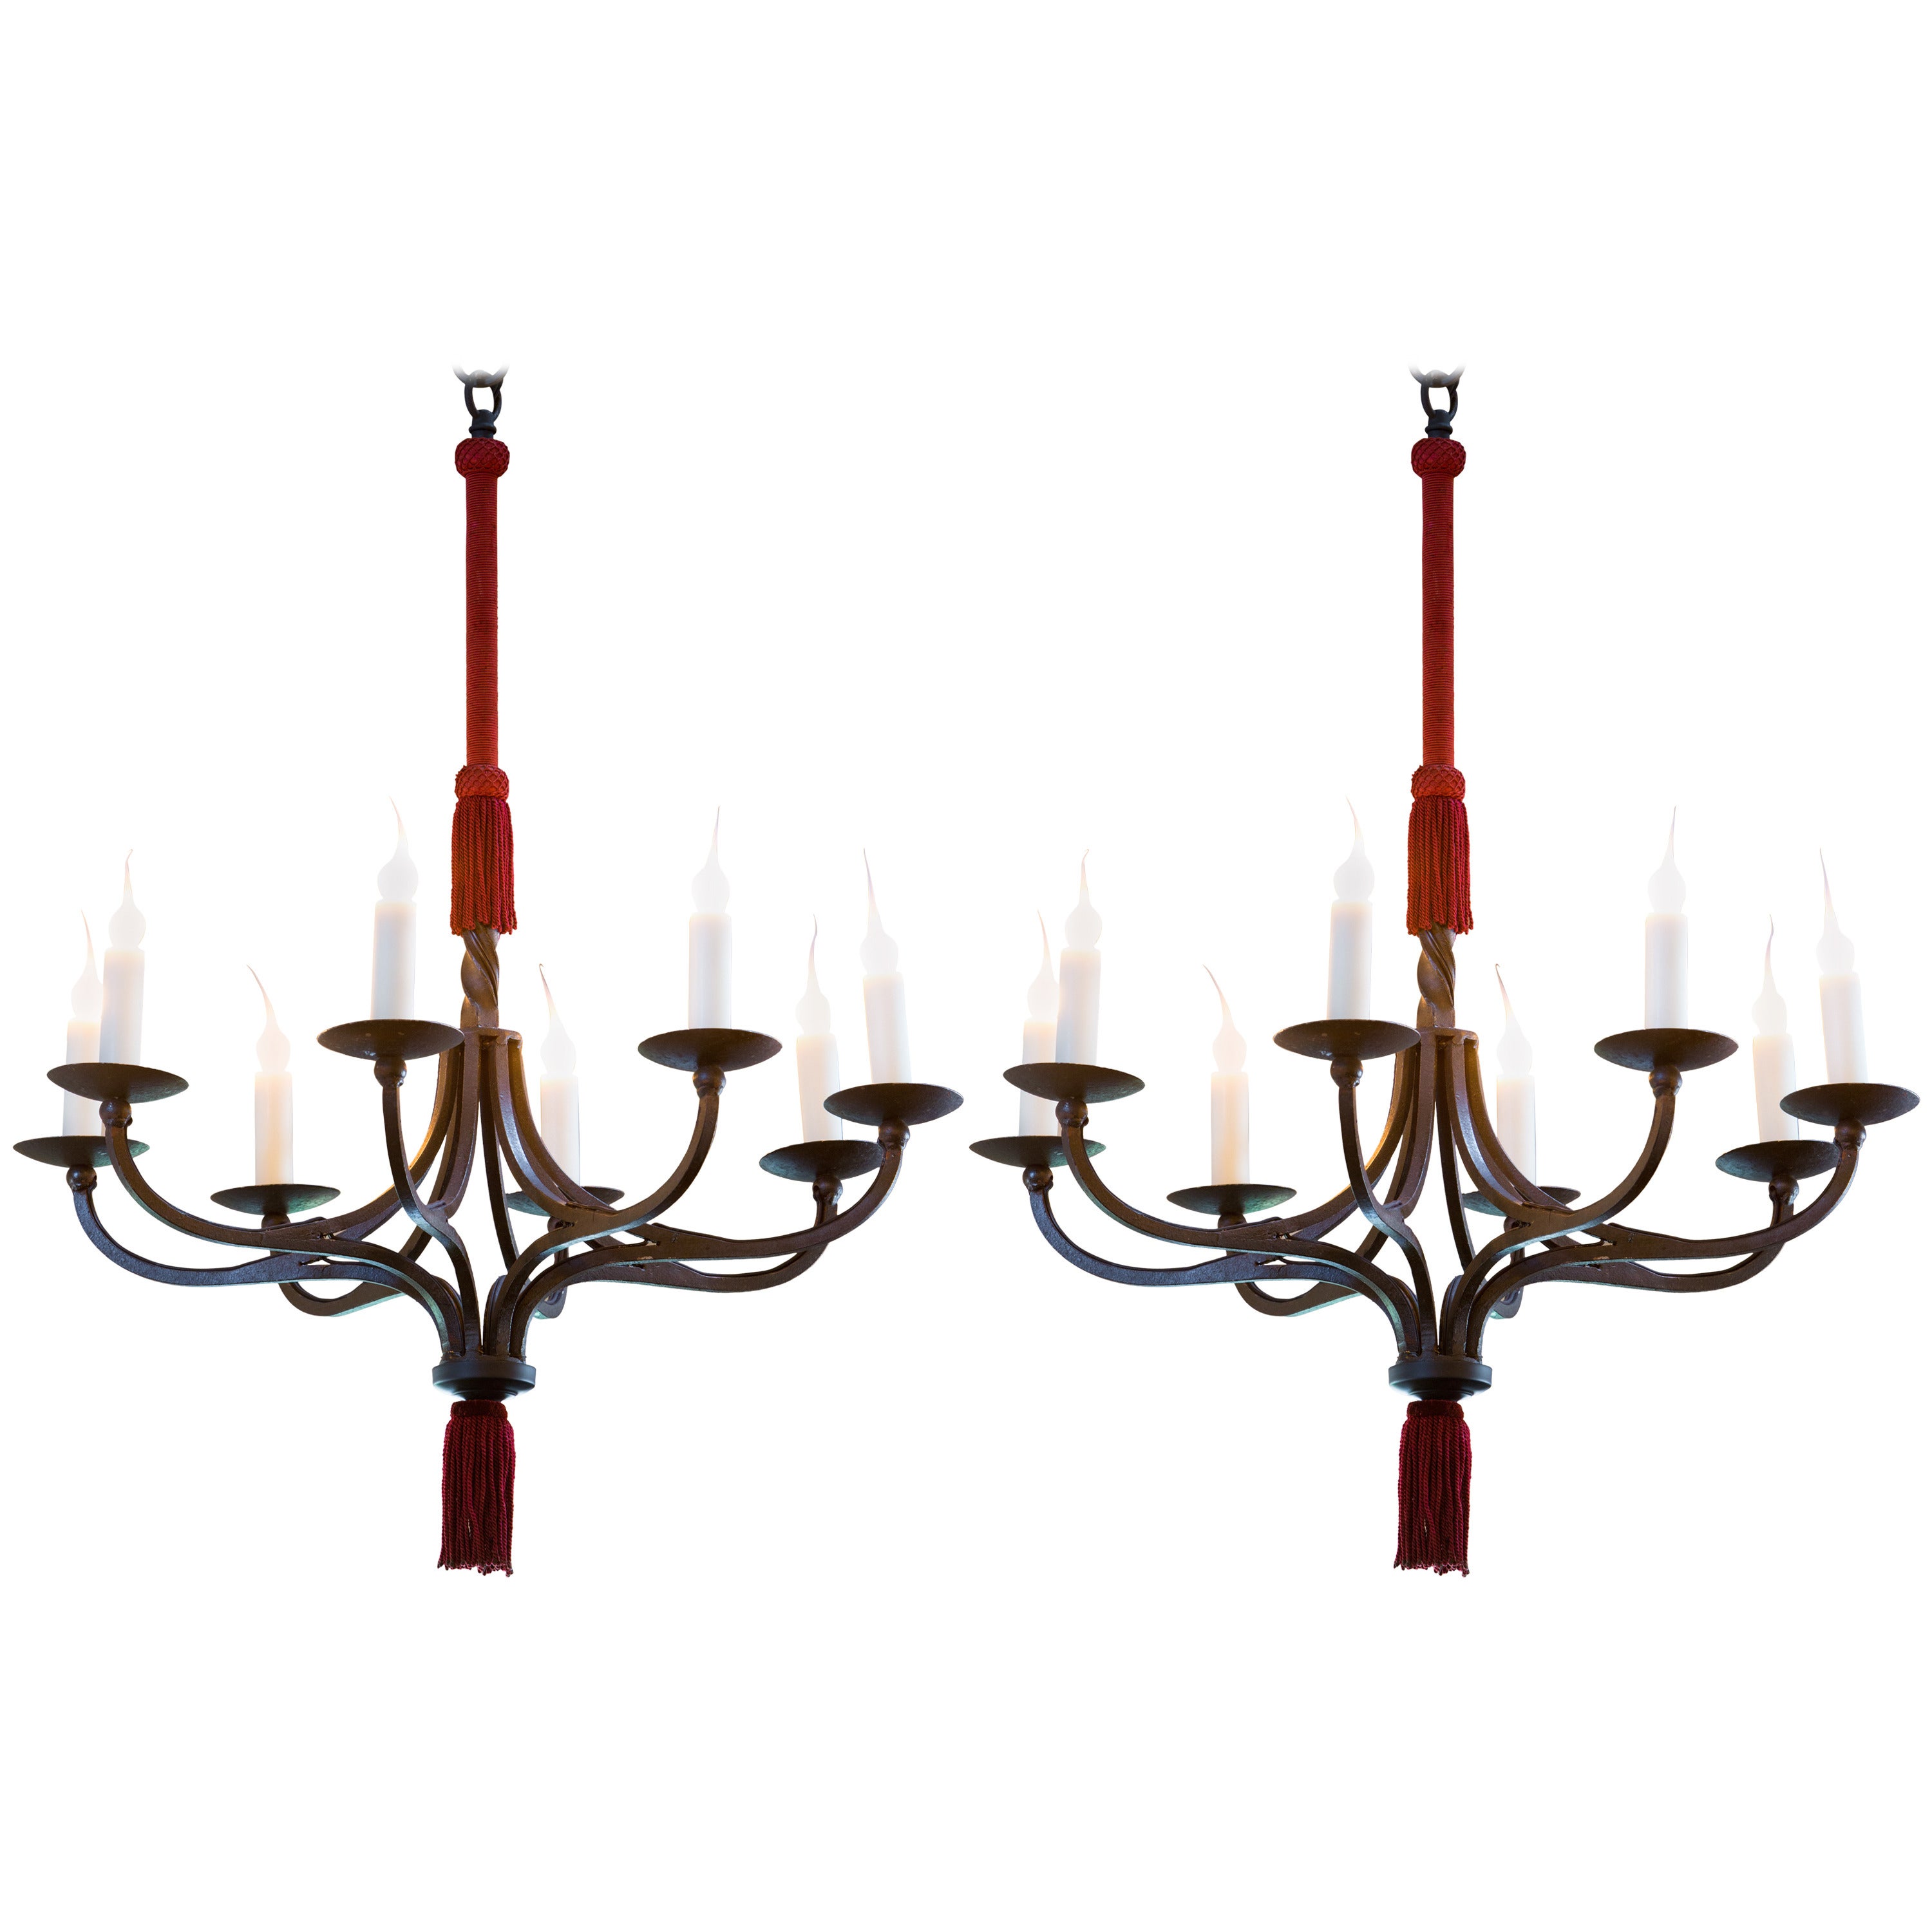 Pair of Vintage Spanish Hand-Forged Iron Chandeliers with Original Fringe Accent